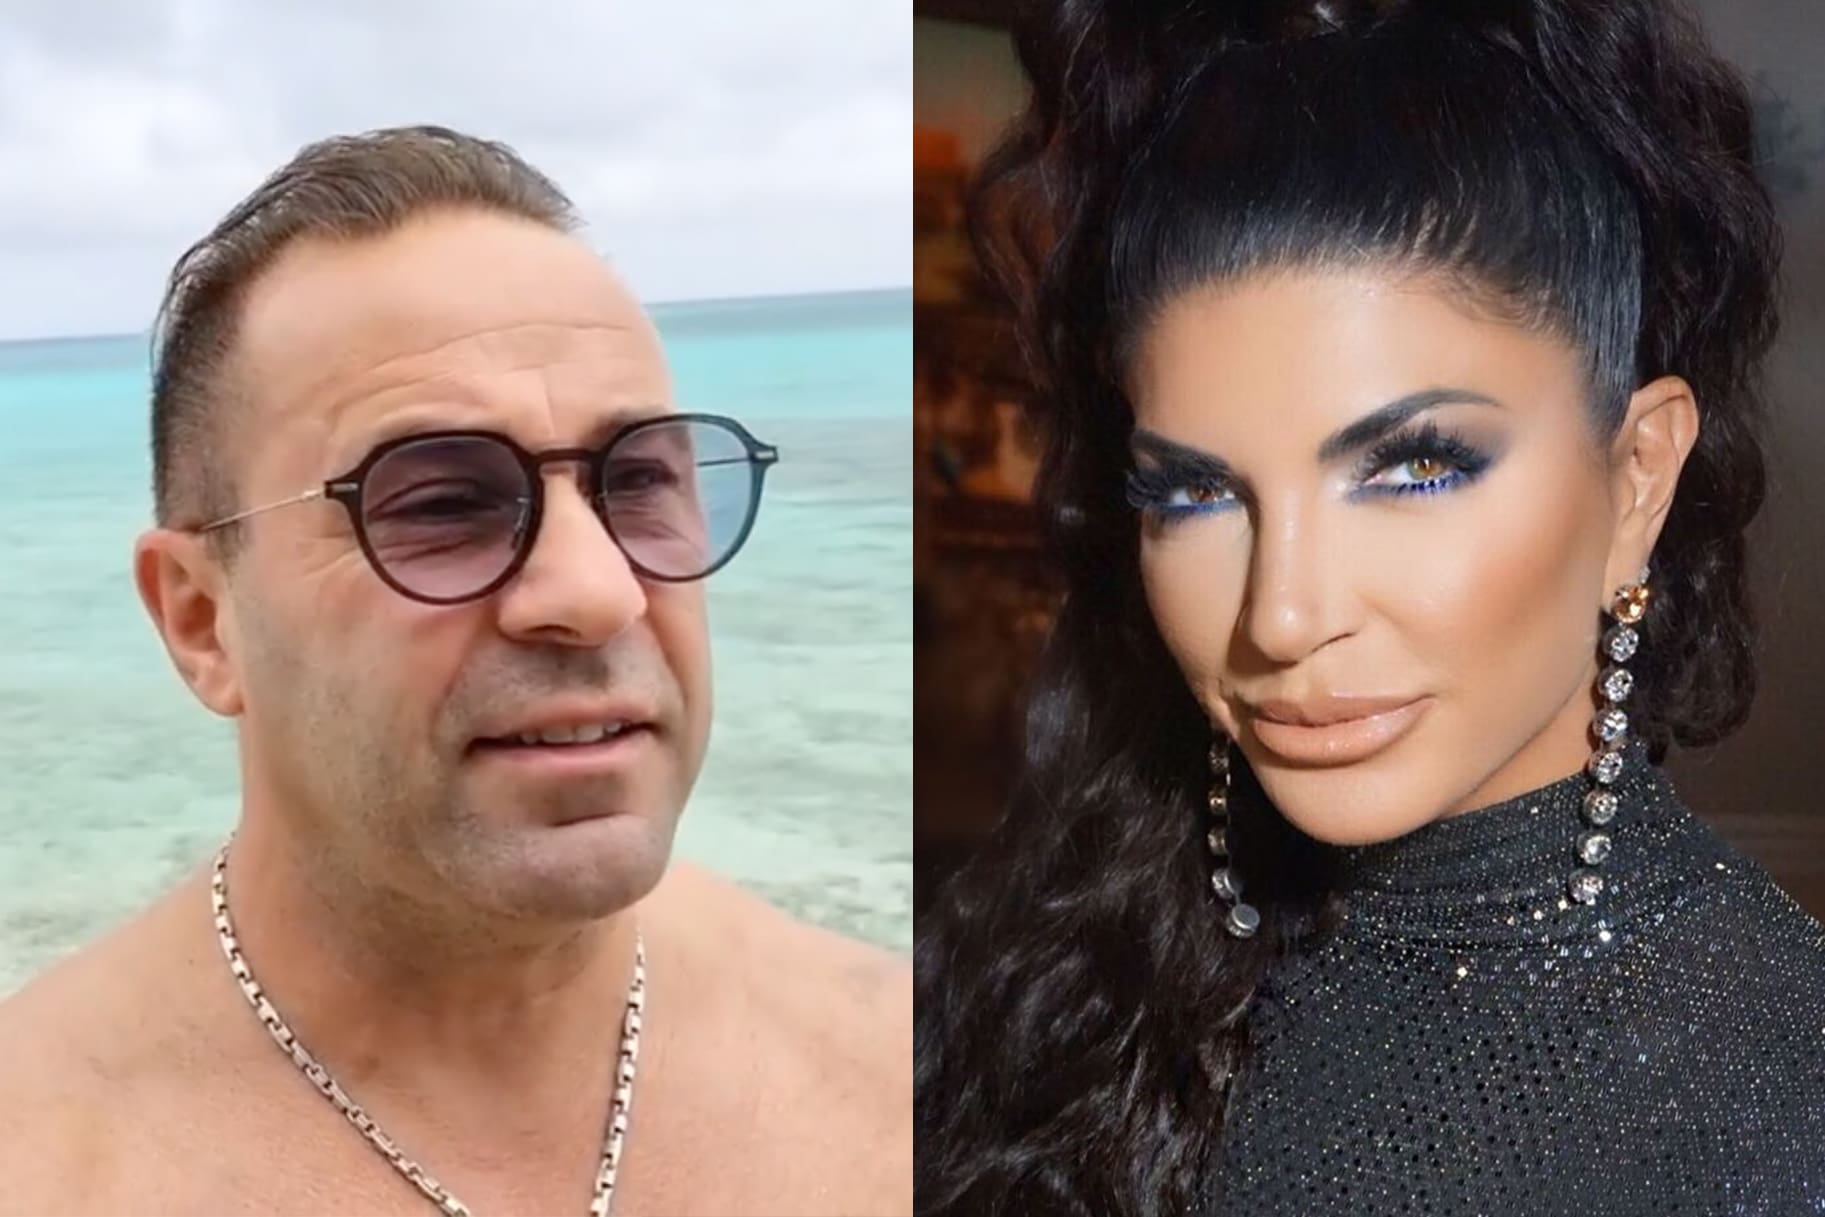 joe-giudice-has-fun-on-luxury-yacht-in-the-bahamas-after-deportation-can-he-return-to-the-states-yet